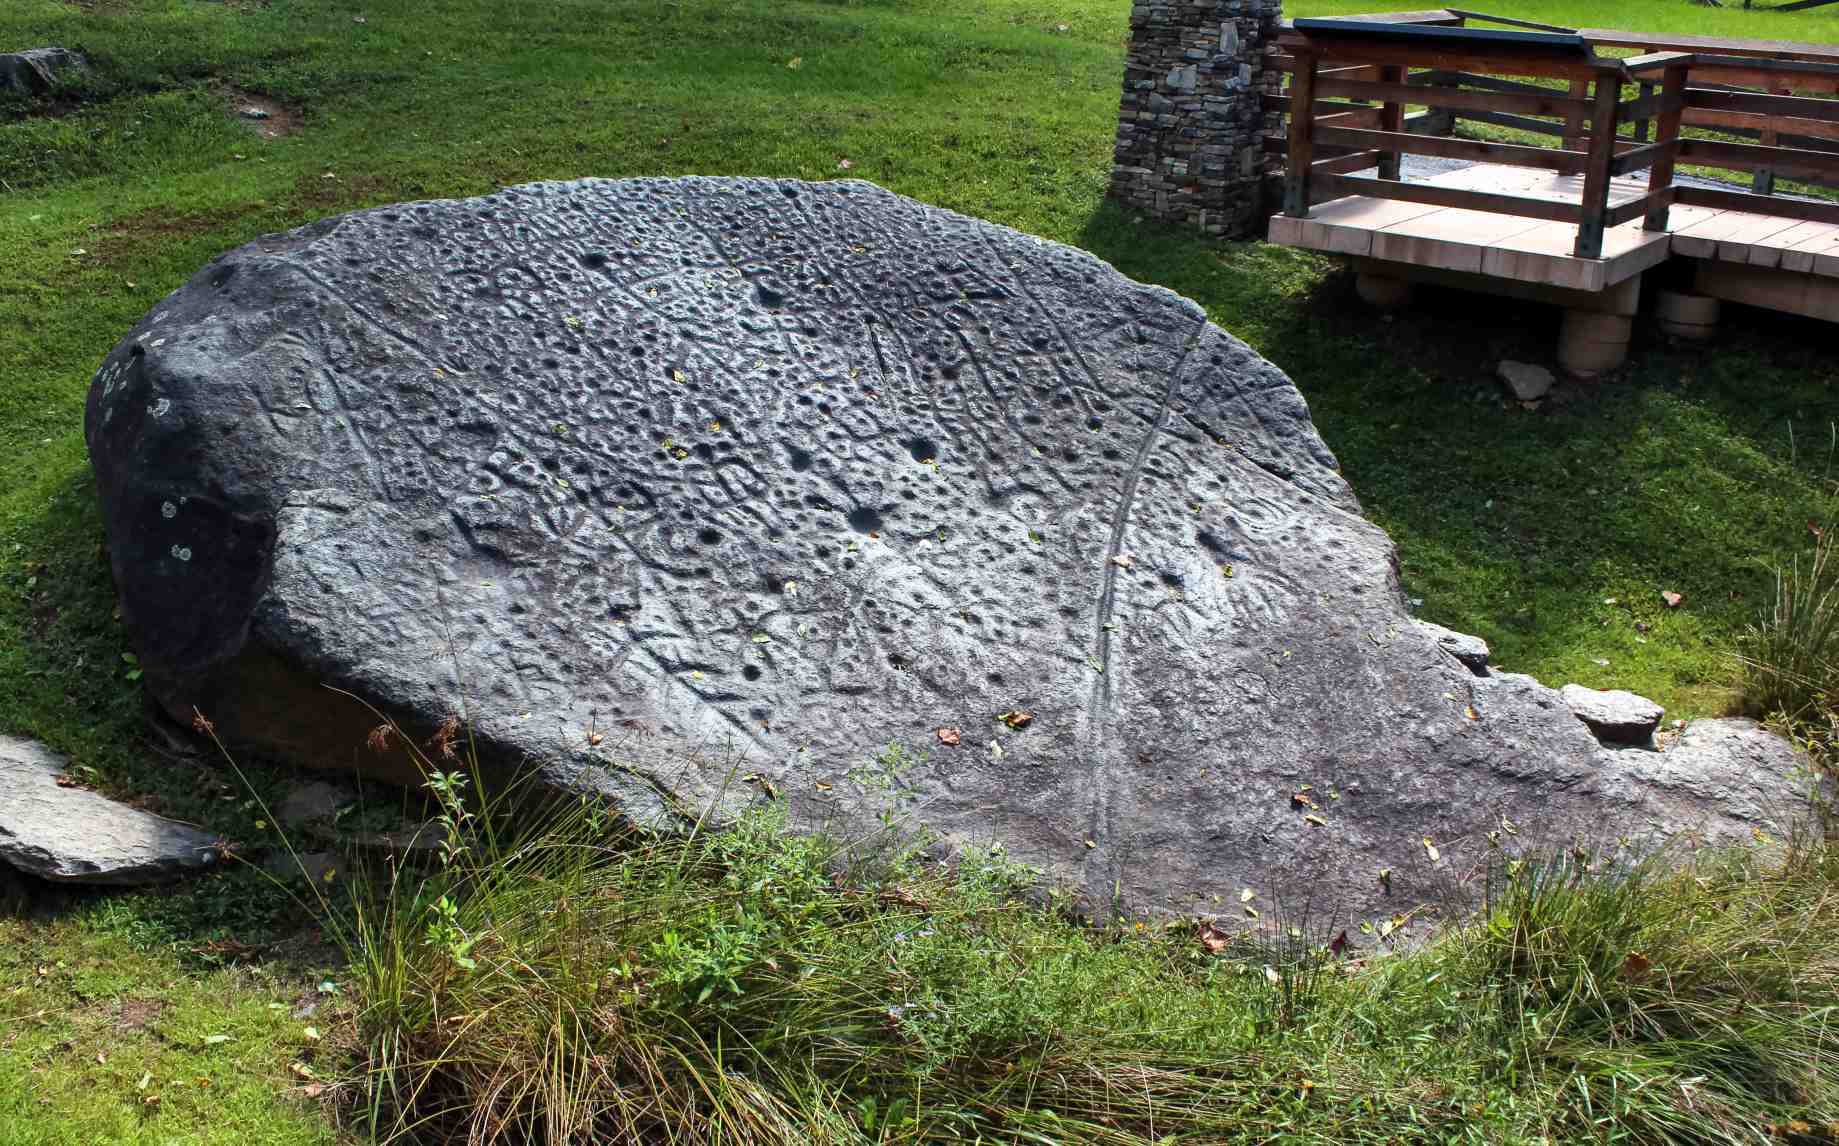 The Judaculla Rock. It contains approximately 1,548 motifs, and retains a special significance for the Cherokee. © 